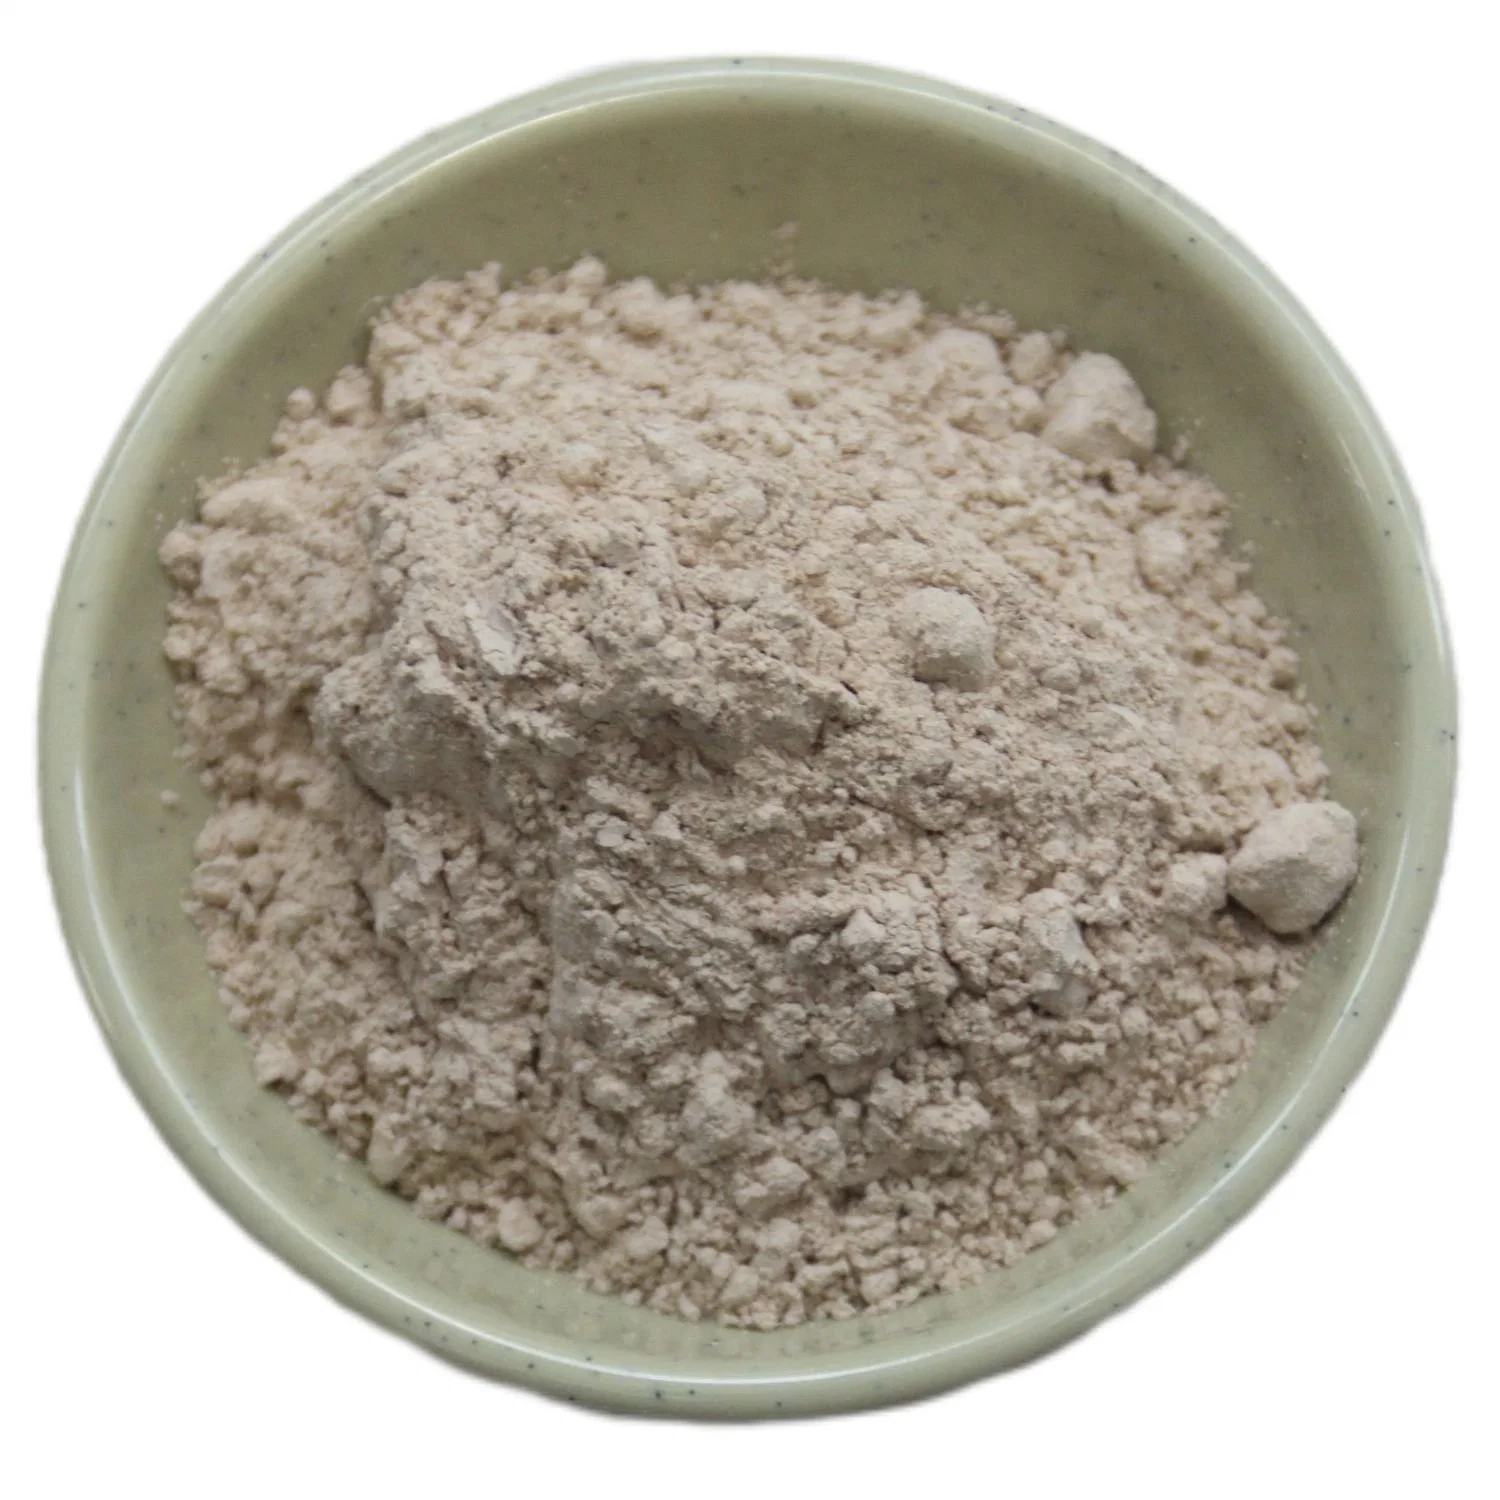 CAS 1309-48-4 High quality/High cost performance Purity 92-95% Magnesium Oxide